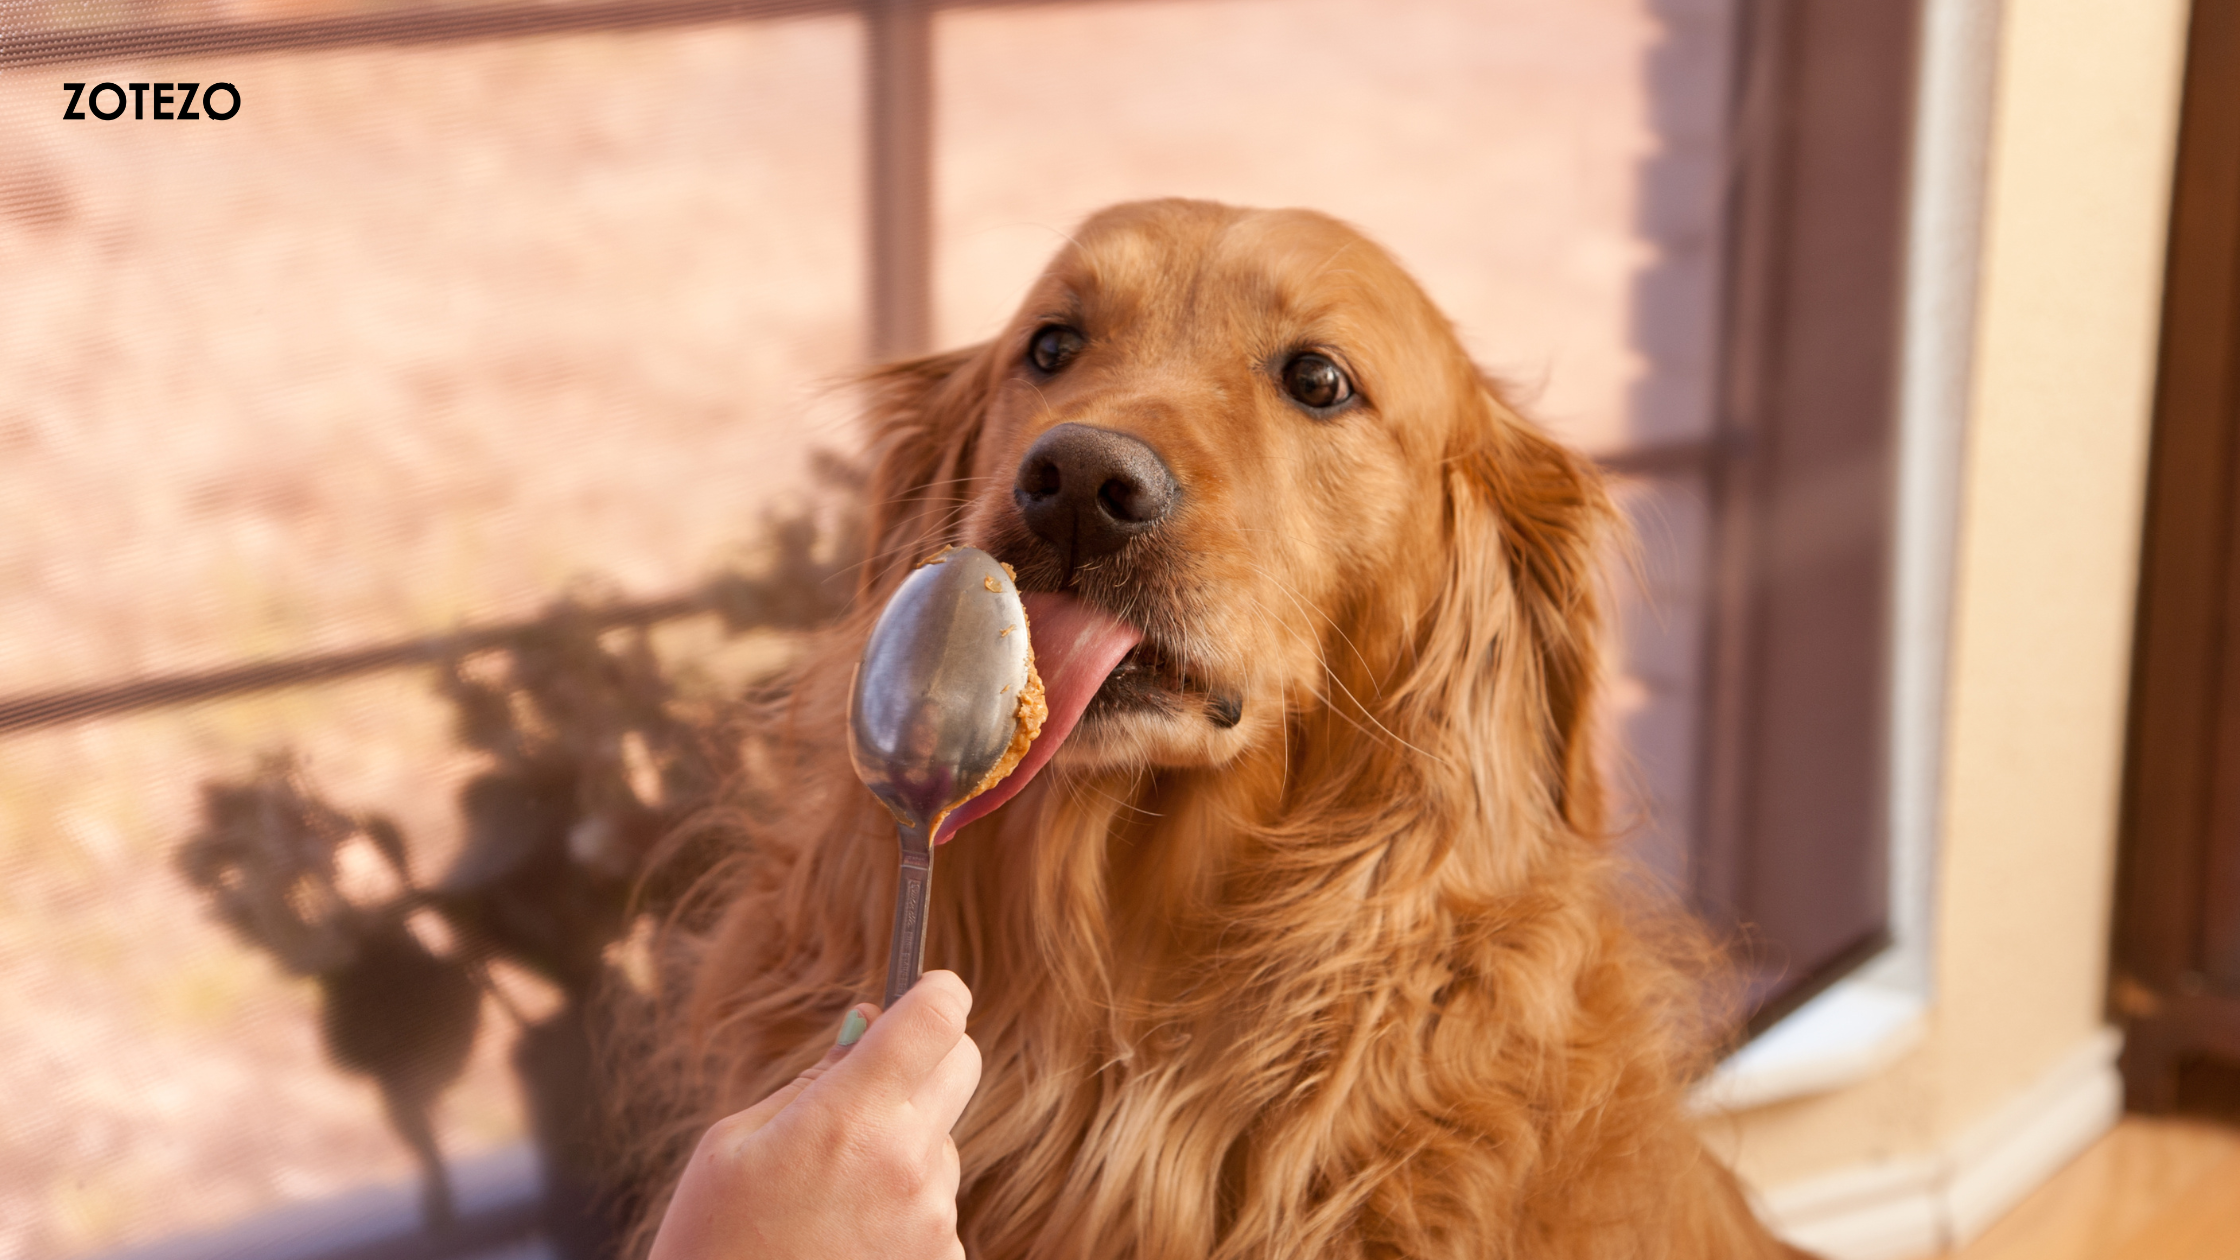 Peanut Butter For Dogs in Sweden